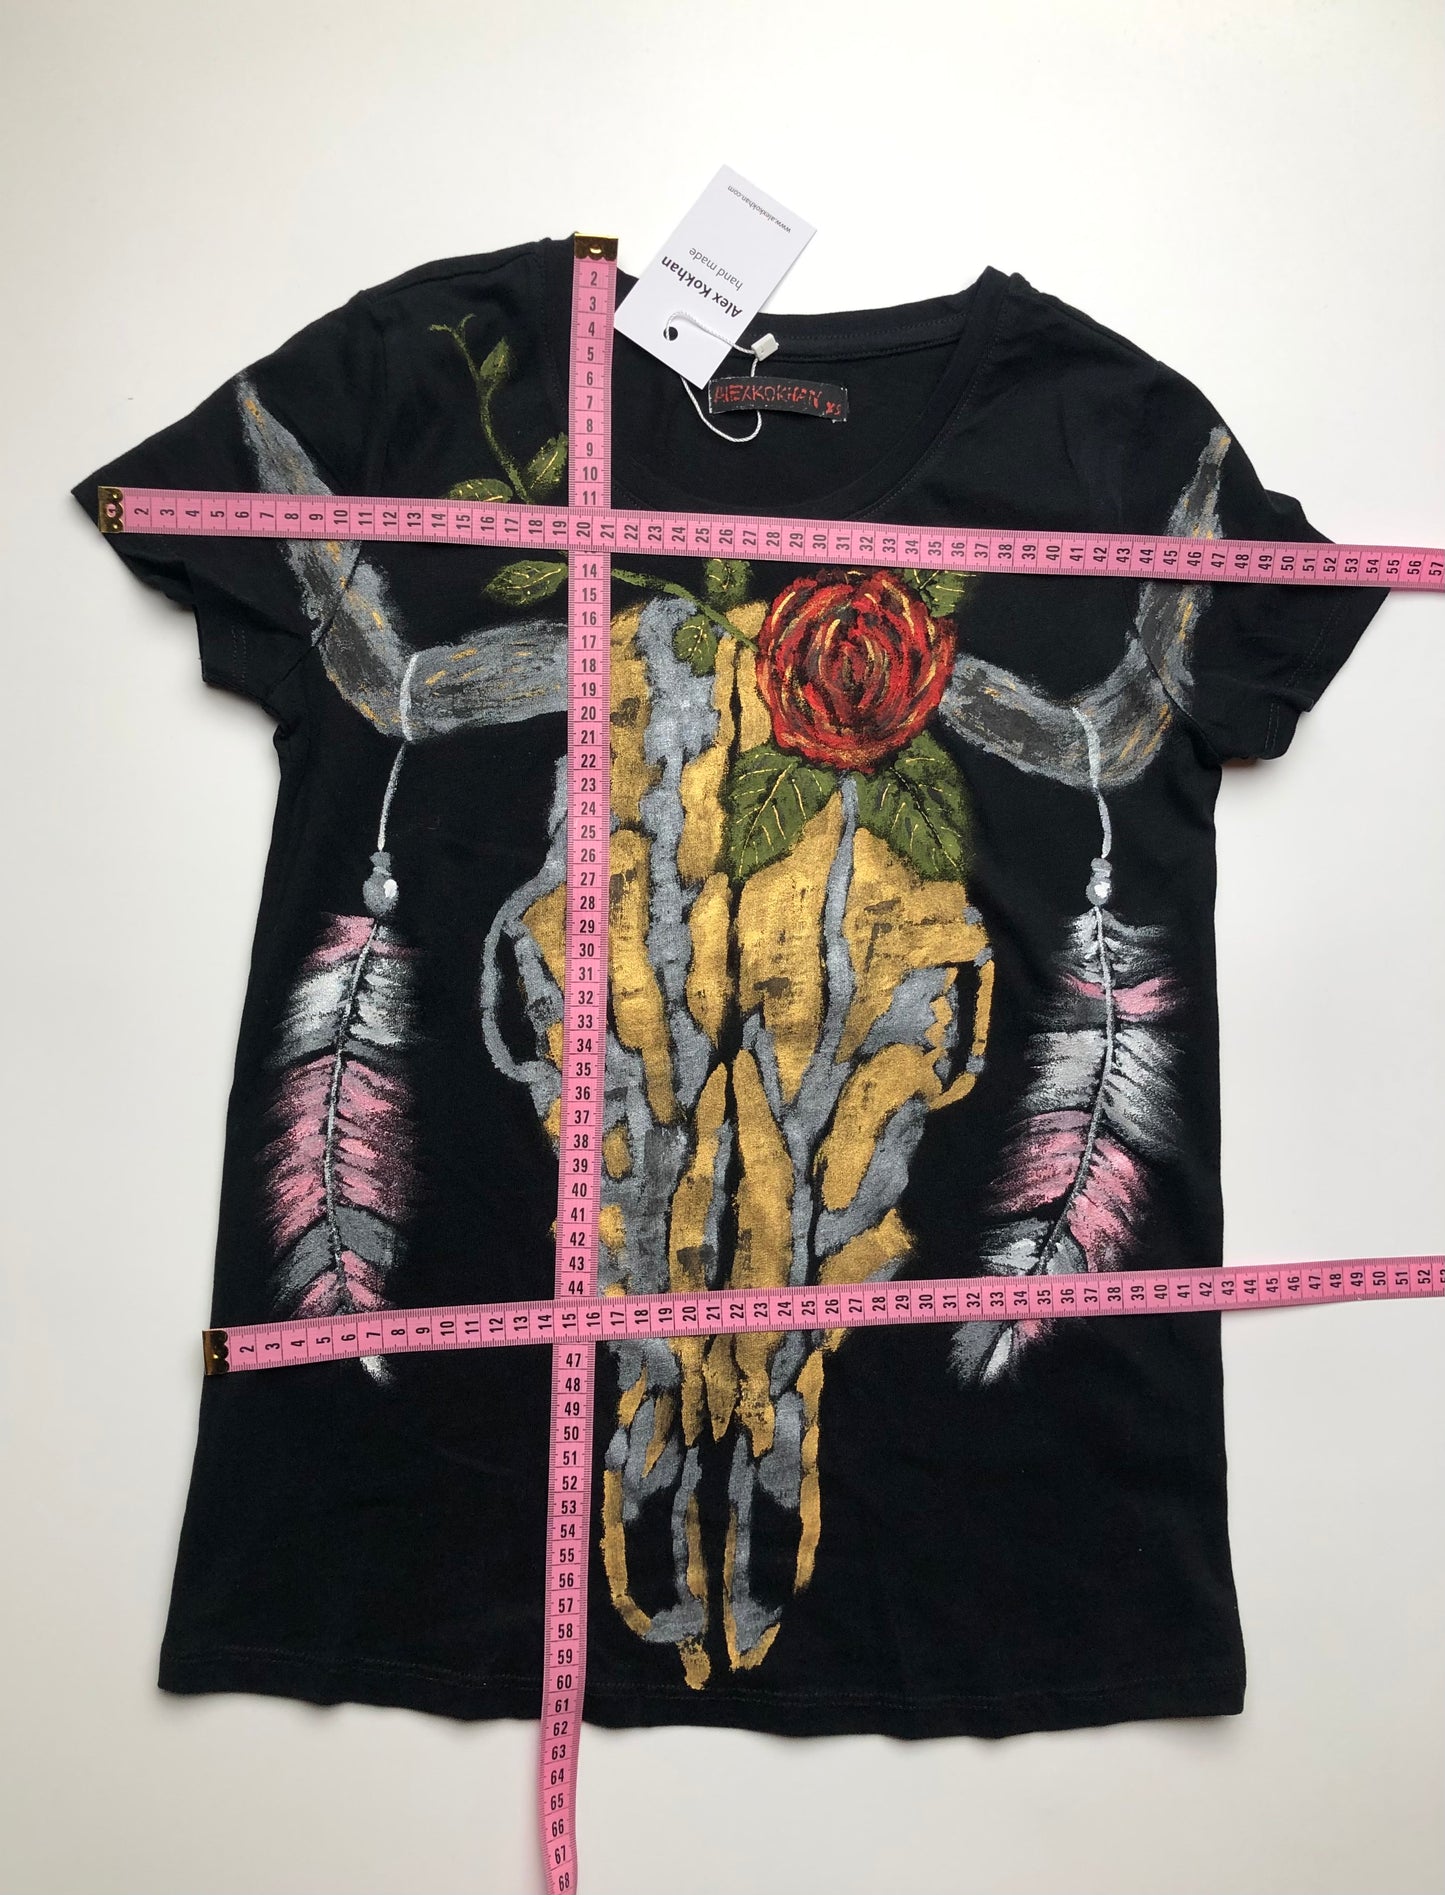 Hand painted with acrylics on a T-shirt in one size XS. Product length 60 cm, width at the waist 43 cm. Women's short sleeve t-shirt cow skull in feathers